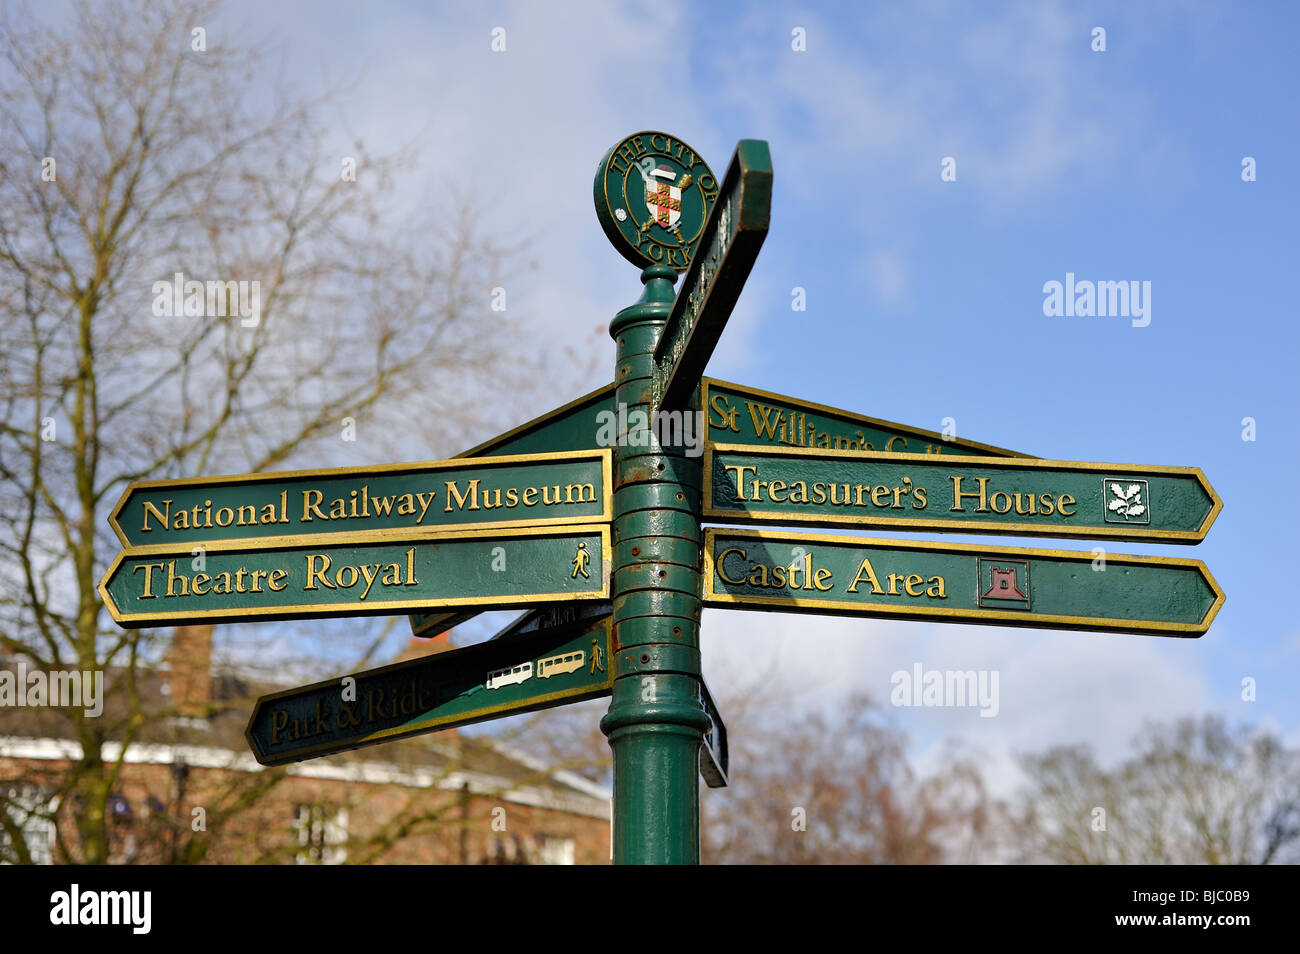 Sign Post York North Yorkshire UK - National Railway Museum Theatre Royal Treasurers House Castle Area Stock Photo